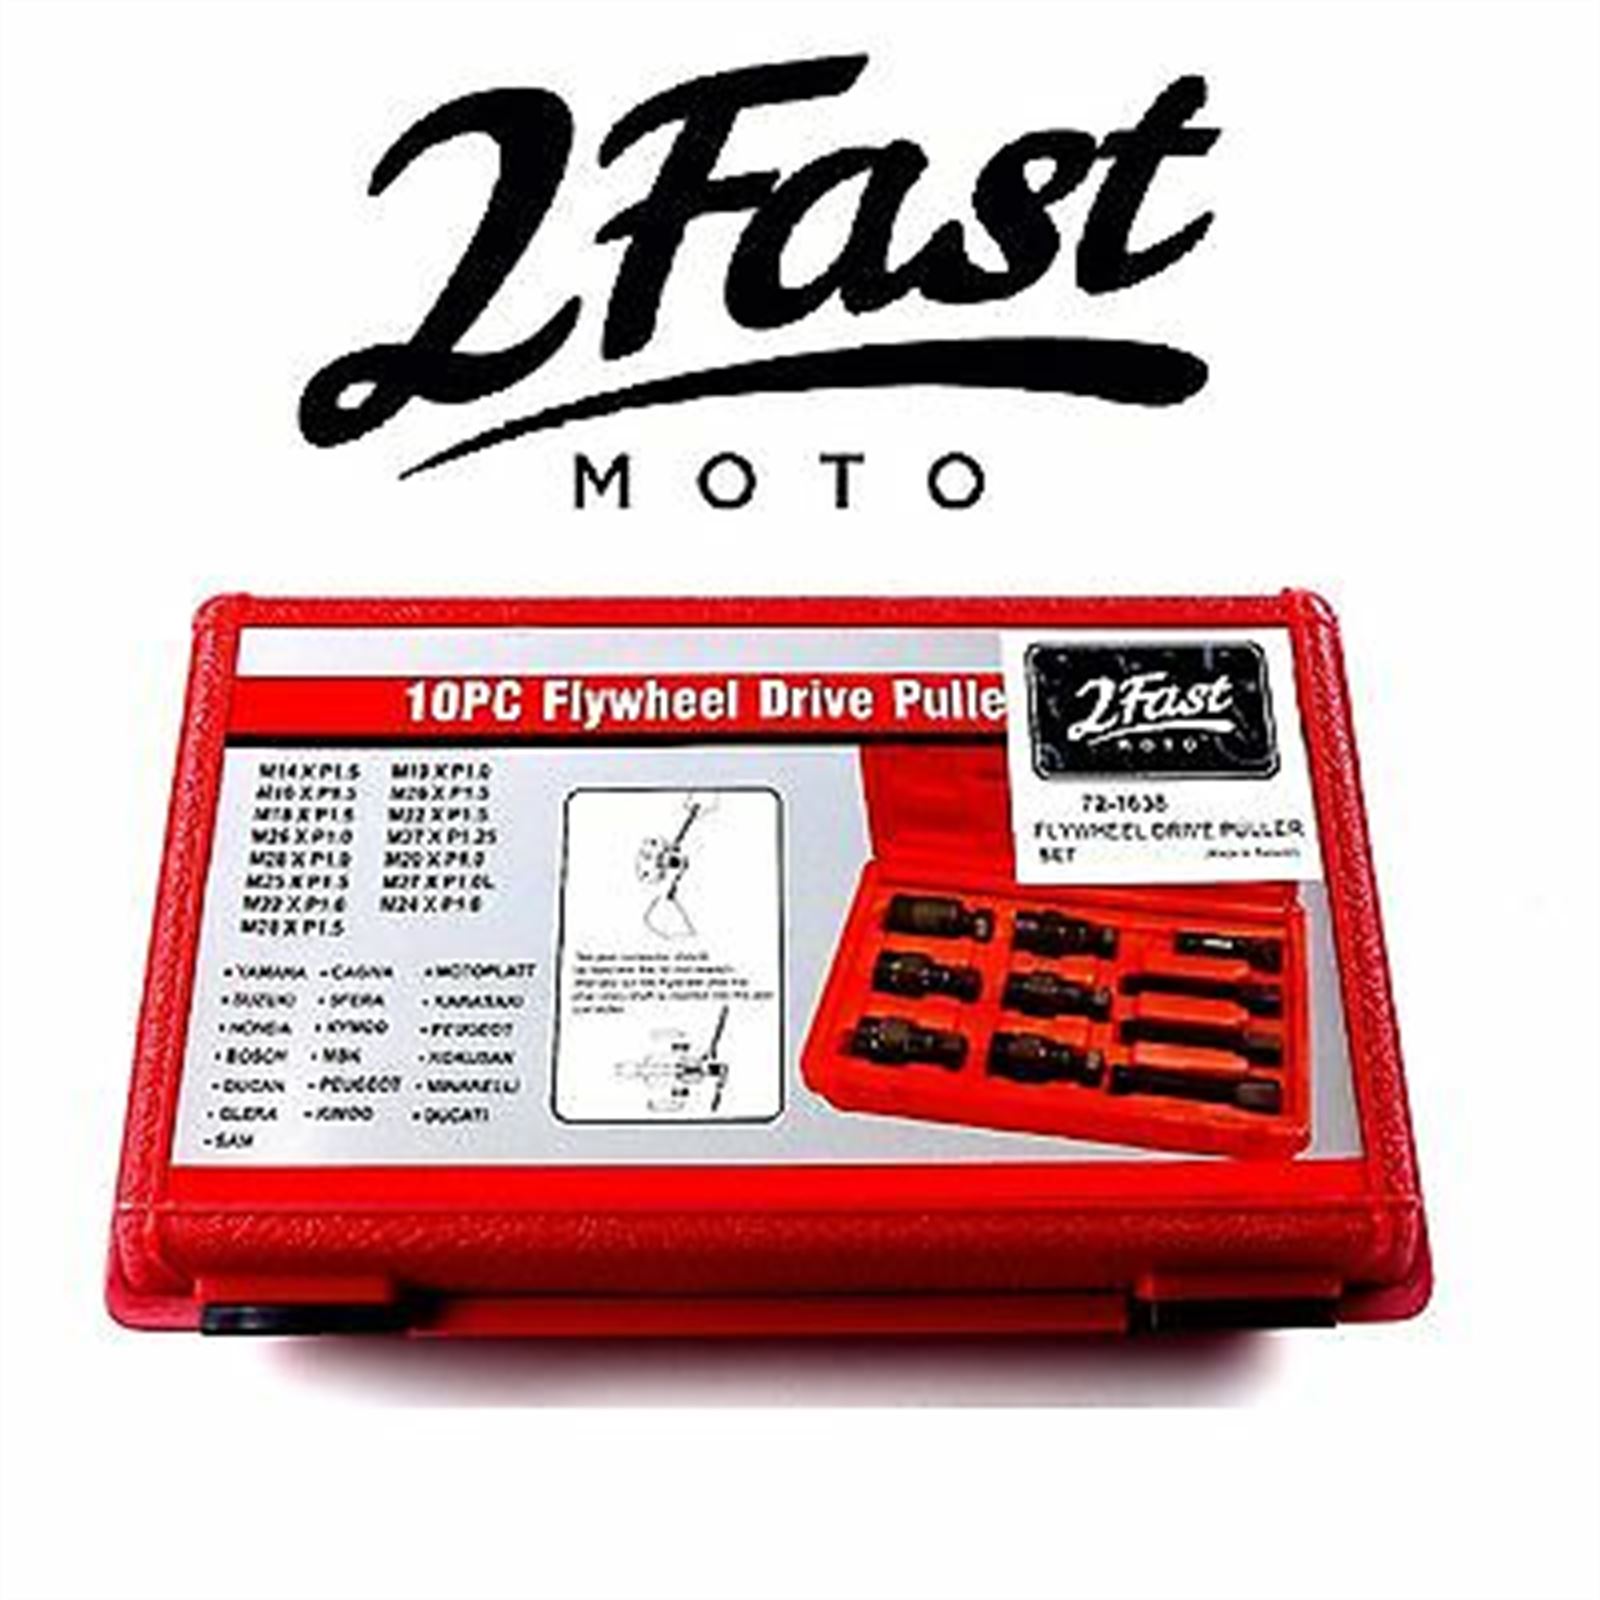 2FastMoto 10-Piece Flywheel Drive Puller Set for Motorcycles 